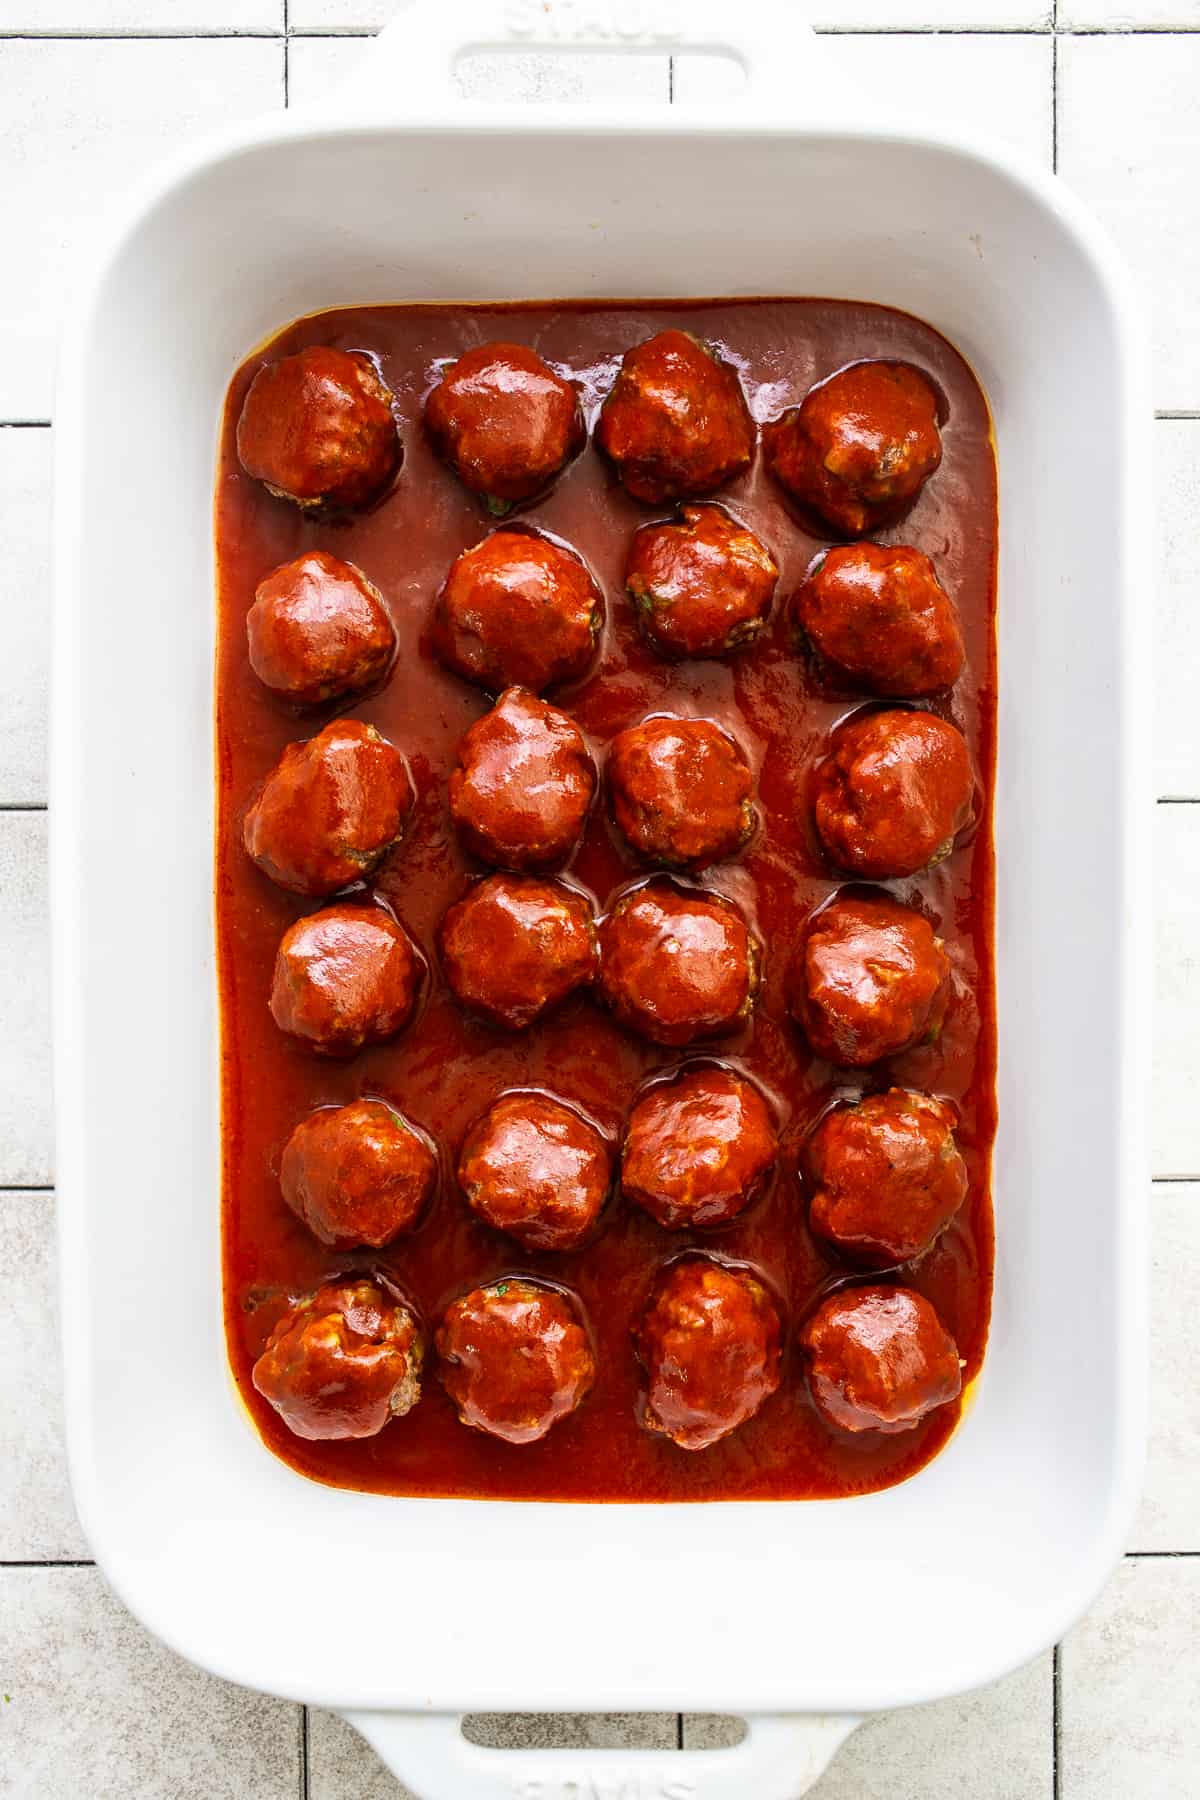 Enchilada sauce poured on top of meatballs in a baking dish.